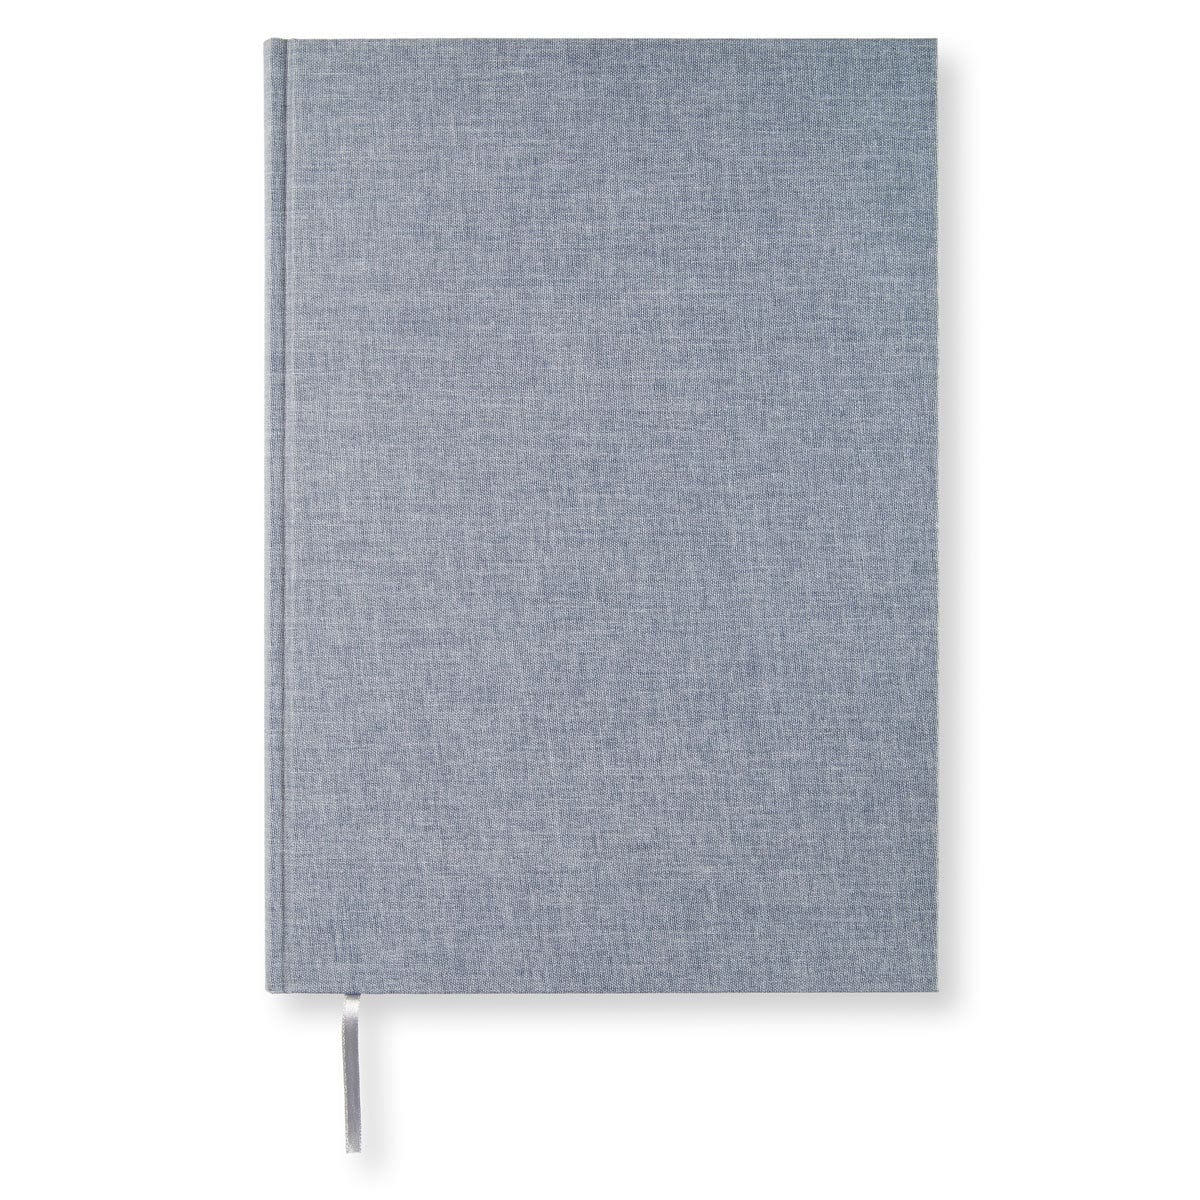 PaperStyle PS NOTEBOOK A4 Plain Denim